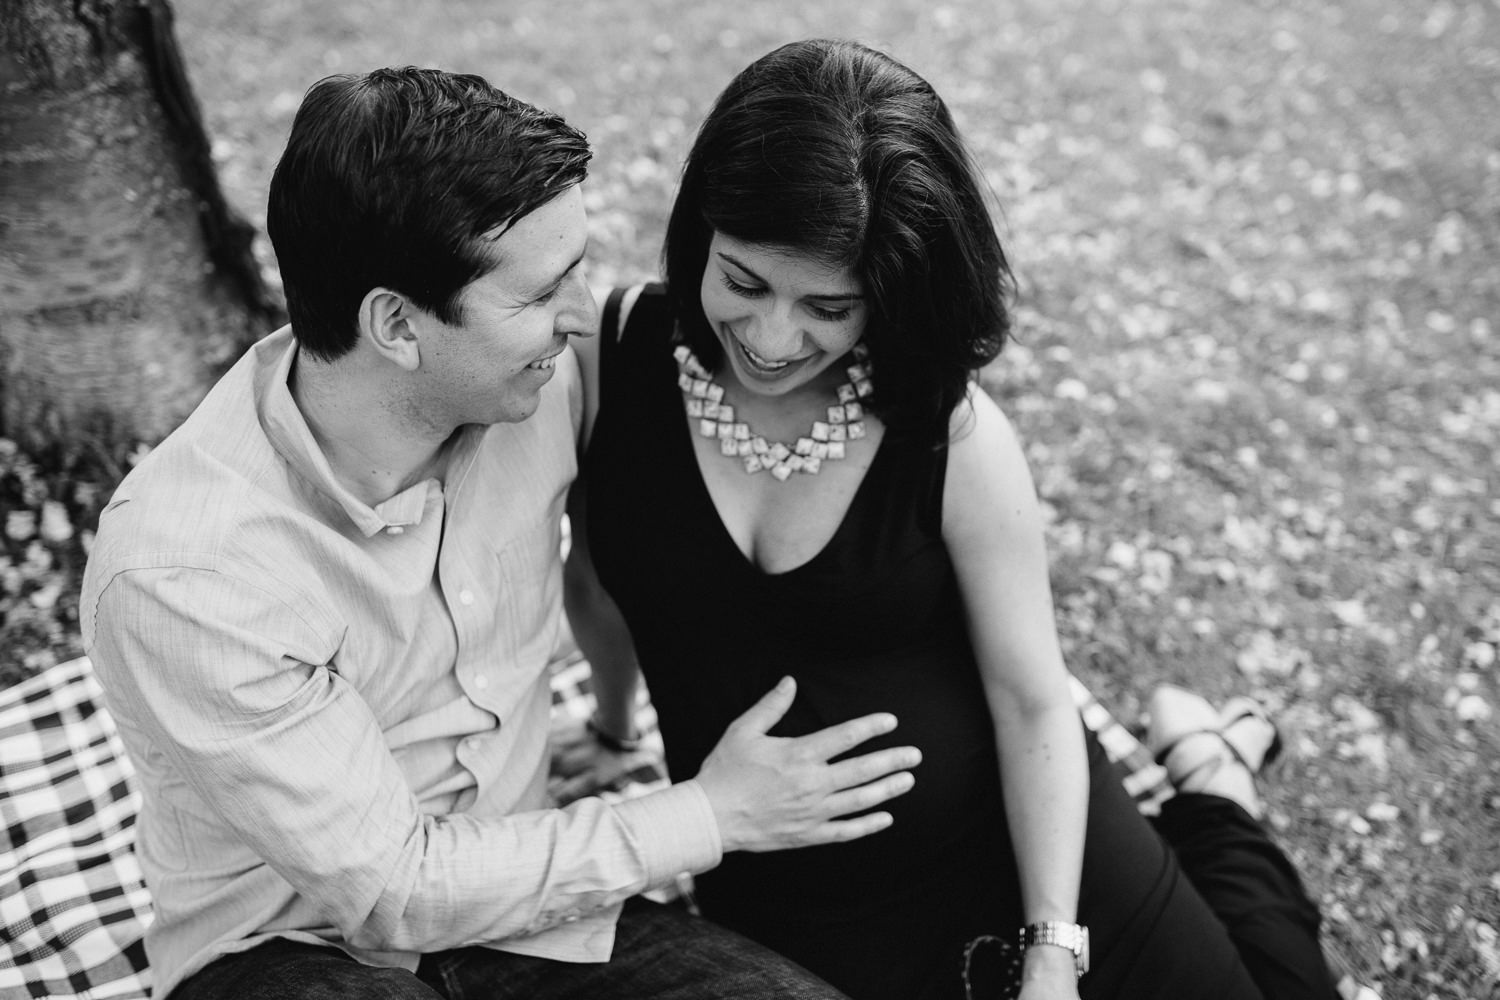 husband and pregnant wife sitting on a blanket in the park, his hand on her baby bump - Stouffville Lifestyle Photos